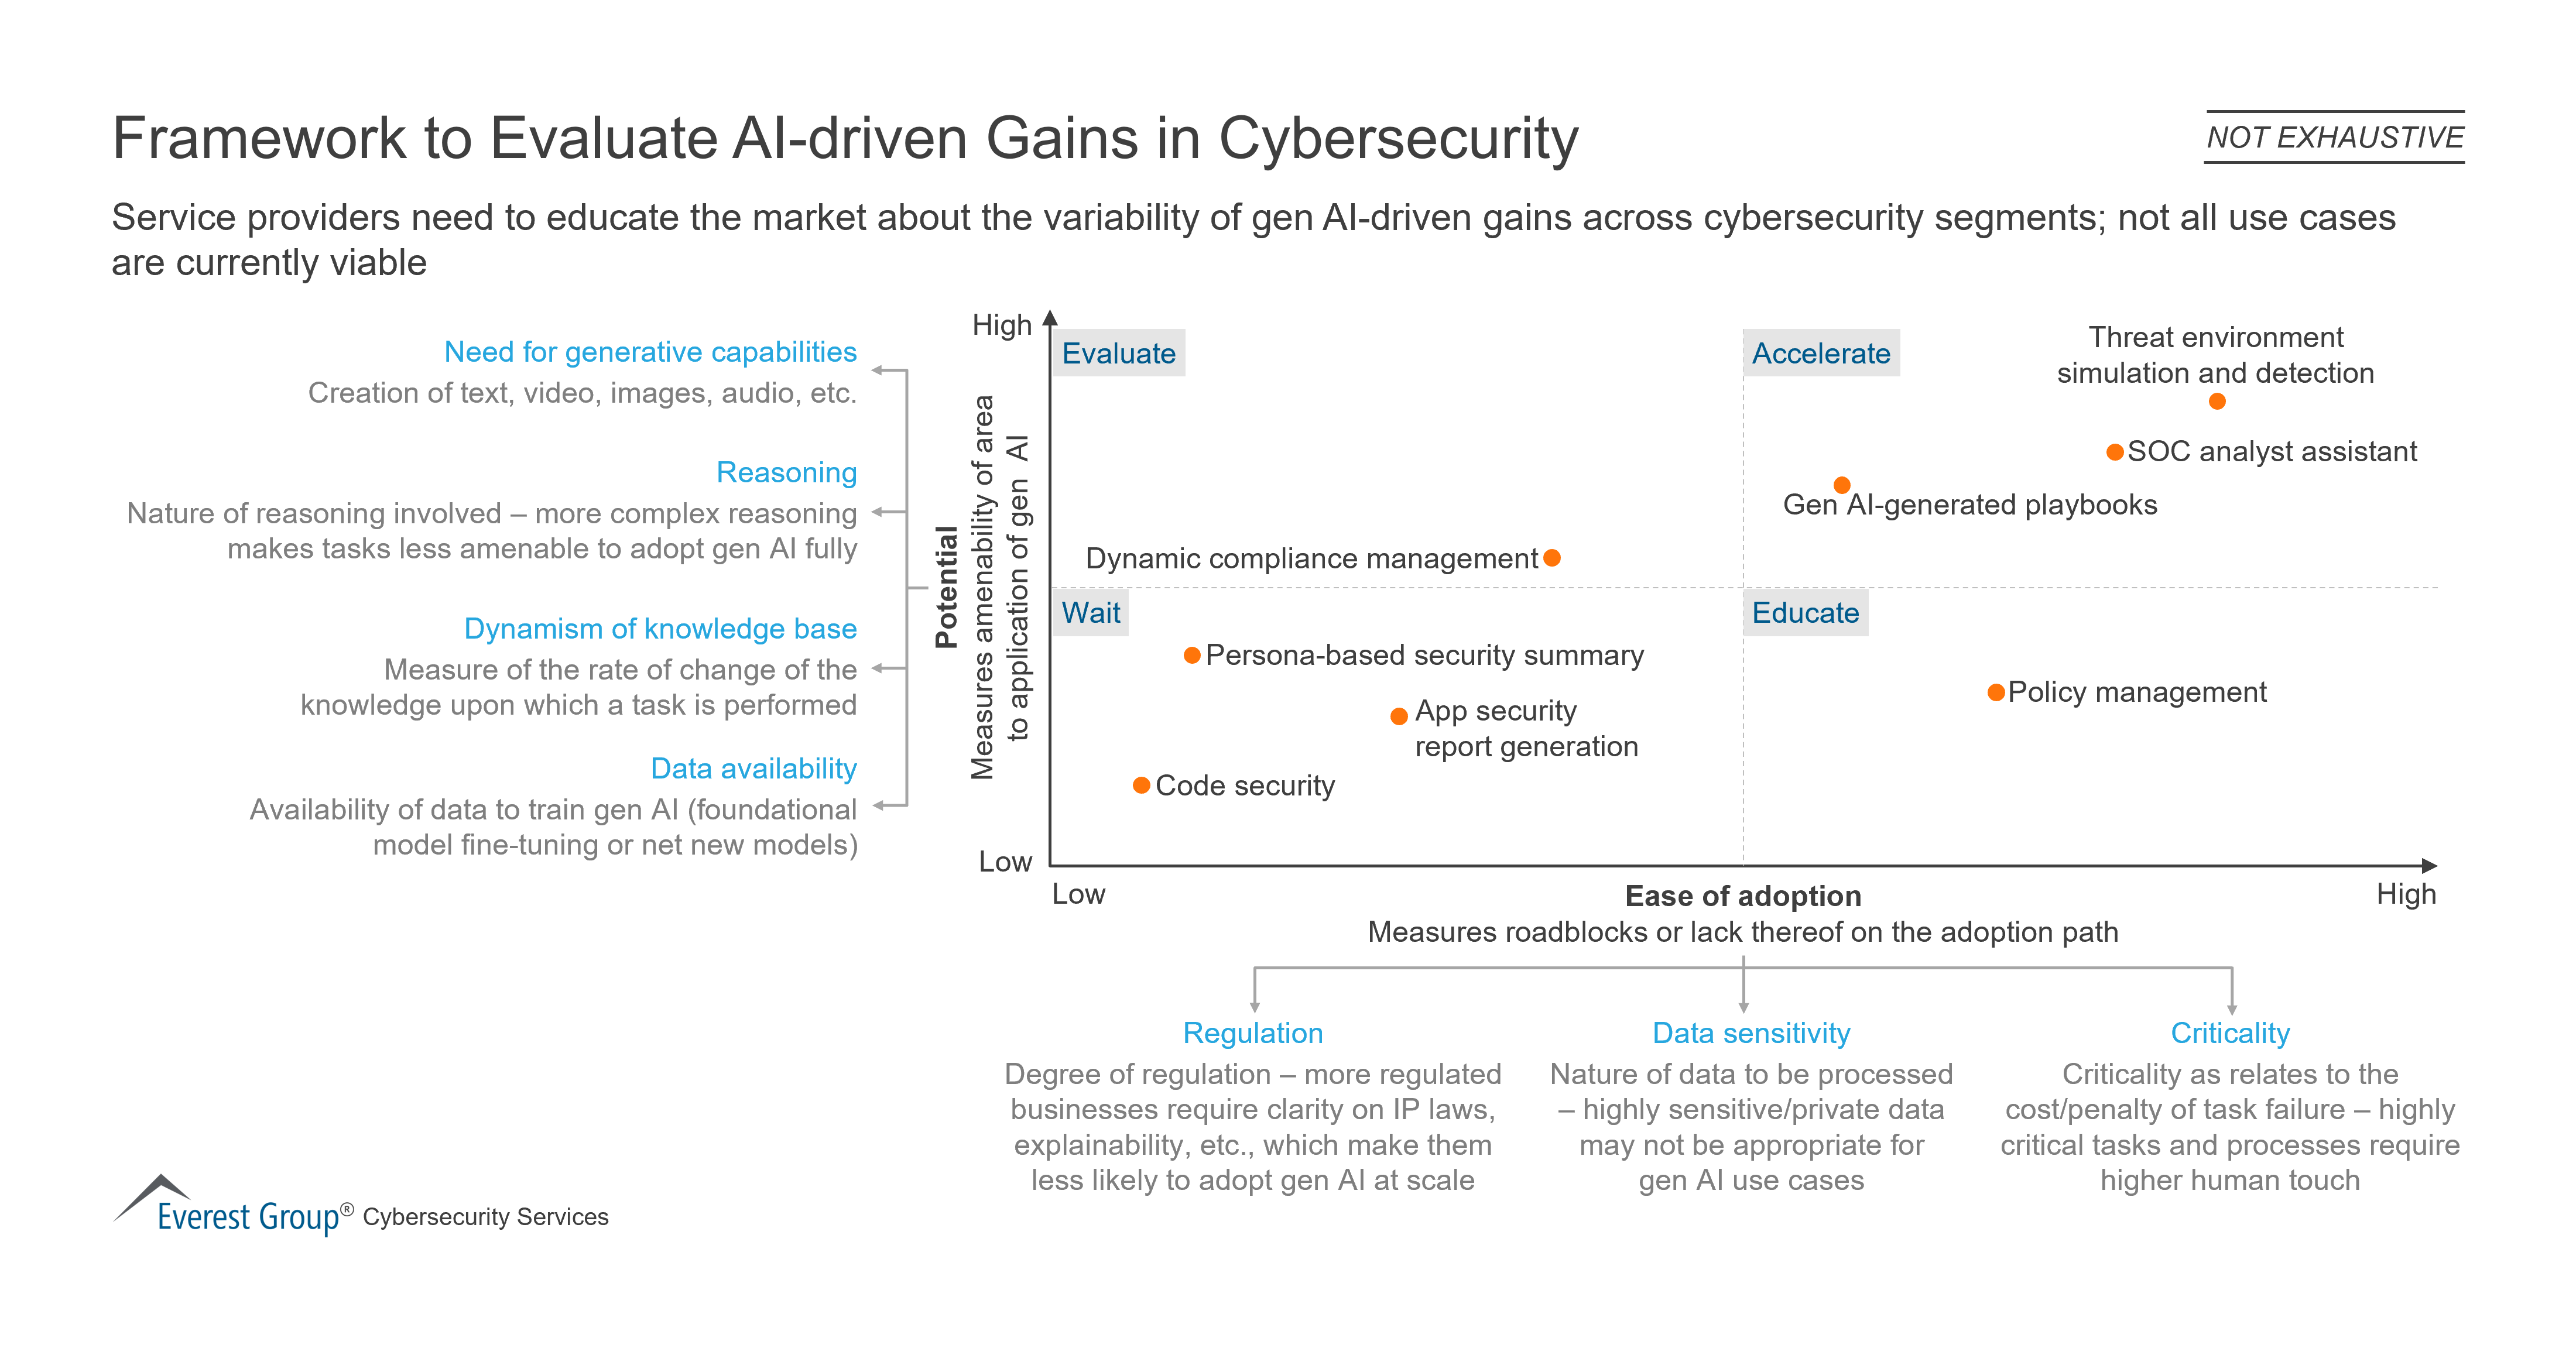 Framework to Evaluate AI-driven Gains in Cybersecurity